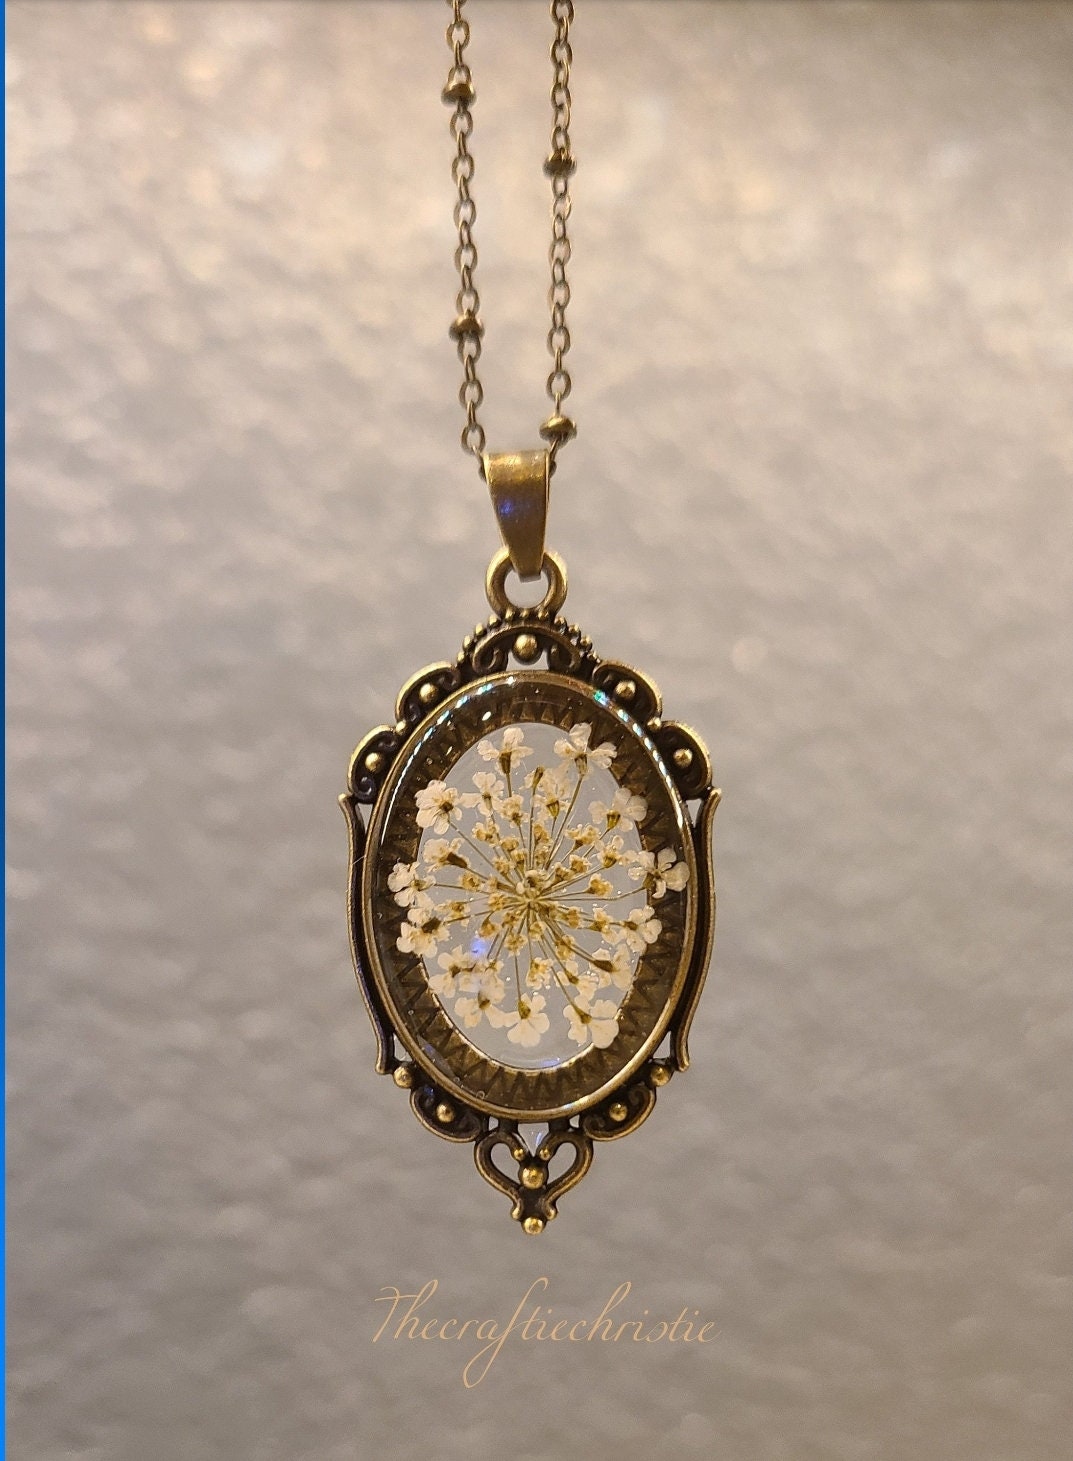 Real Preserved Queen Annes Lace Teal Pendant Necklace - Antique Bronze –  Pressed Wishes